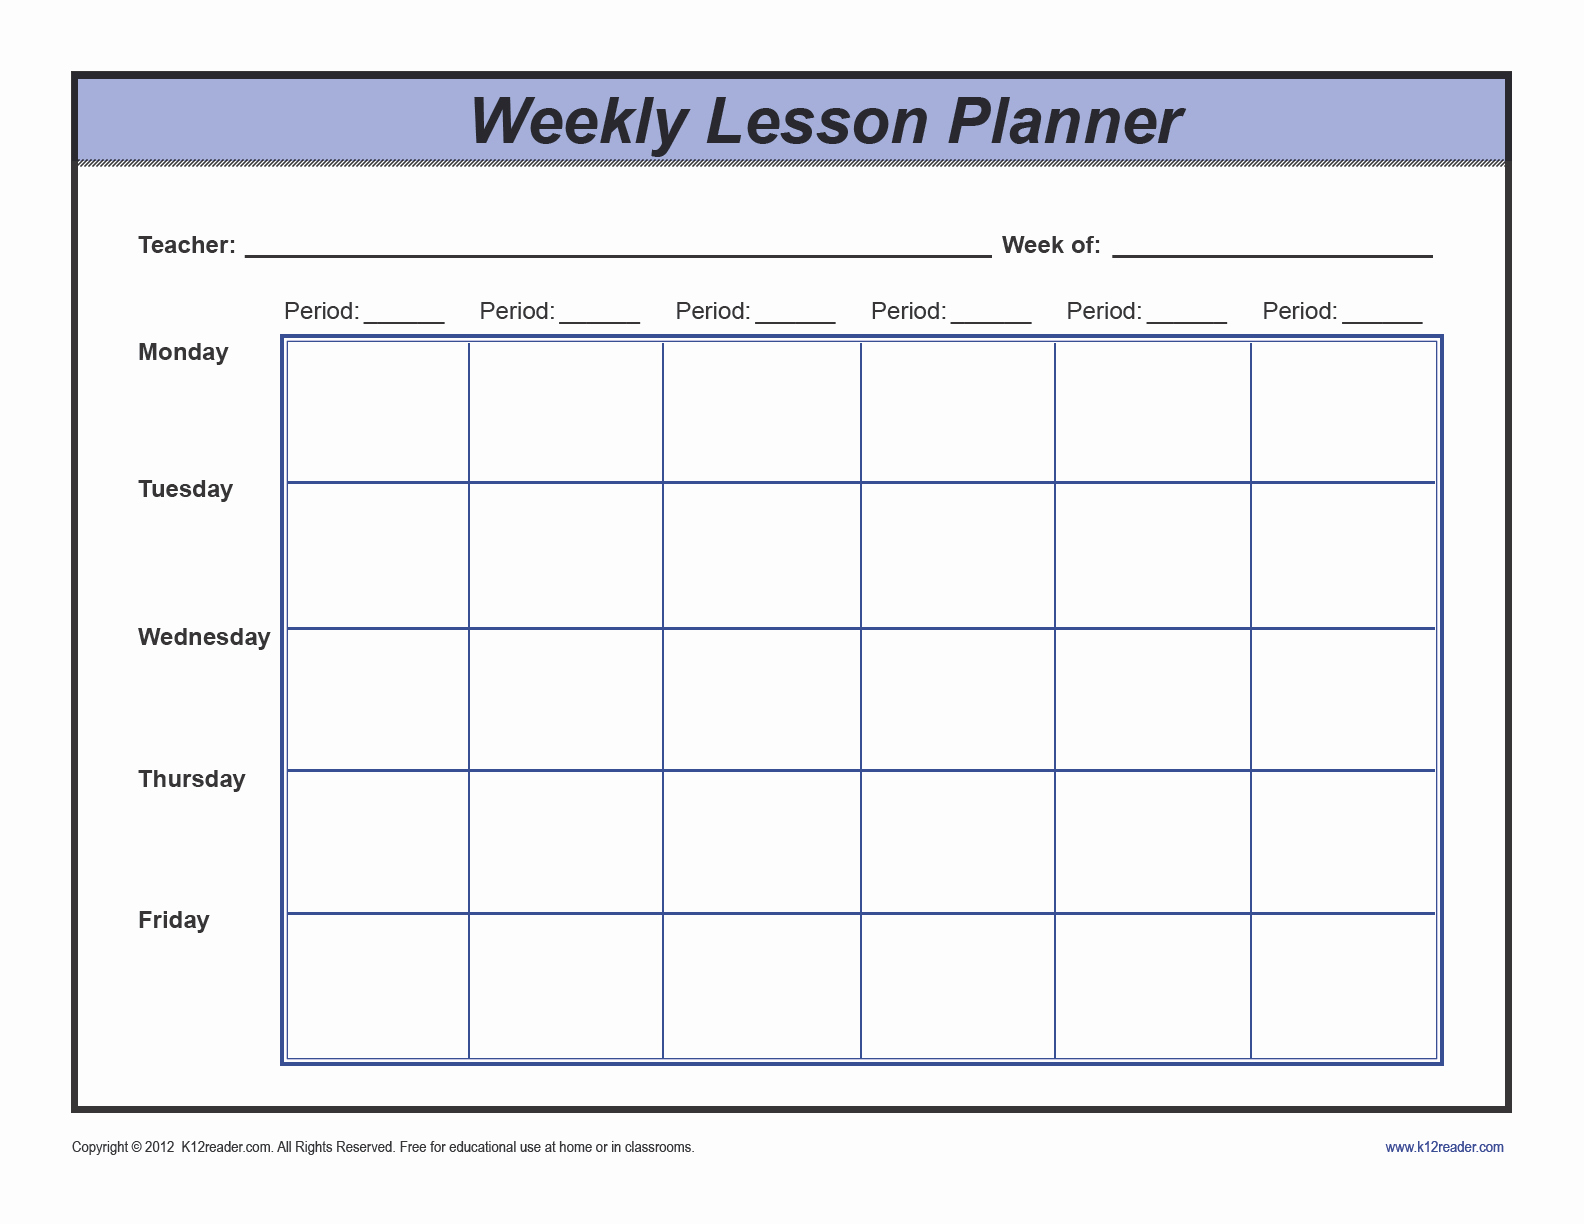 Free Weekly Lesson Plan Template Awesome Download Weekly Lesson Plan Template Preschool